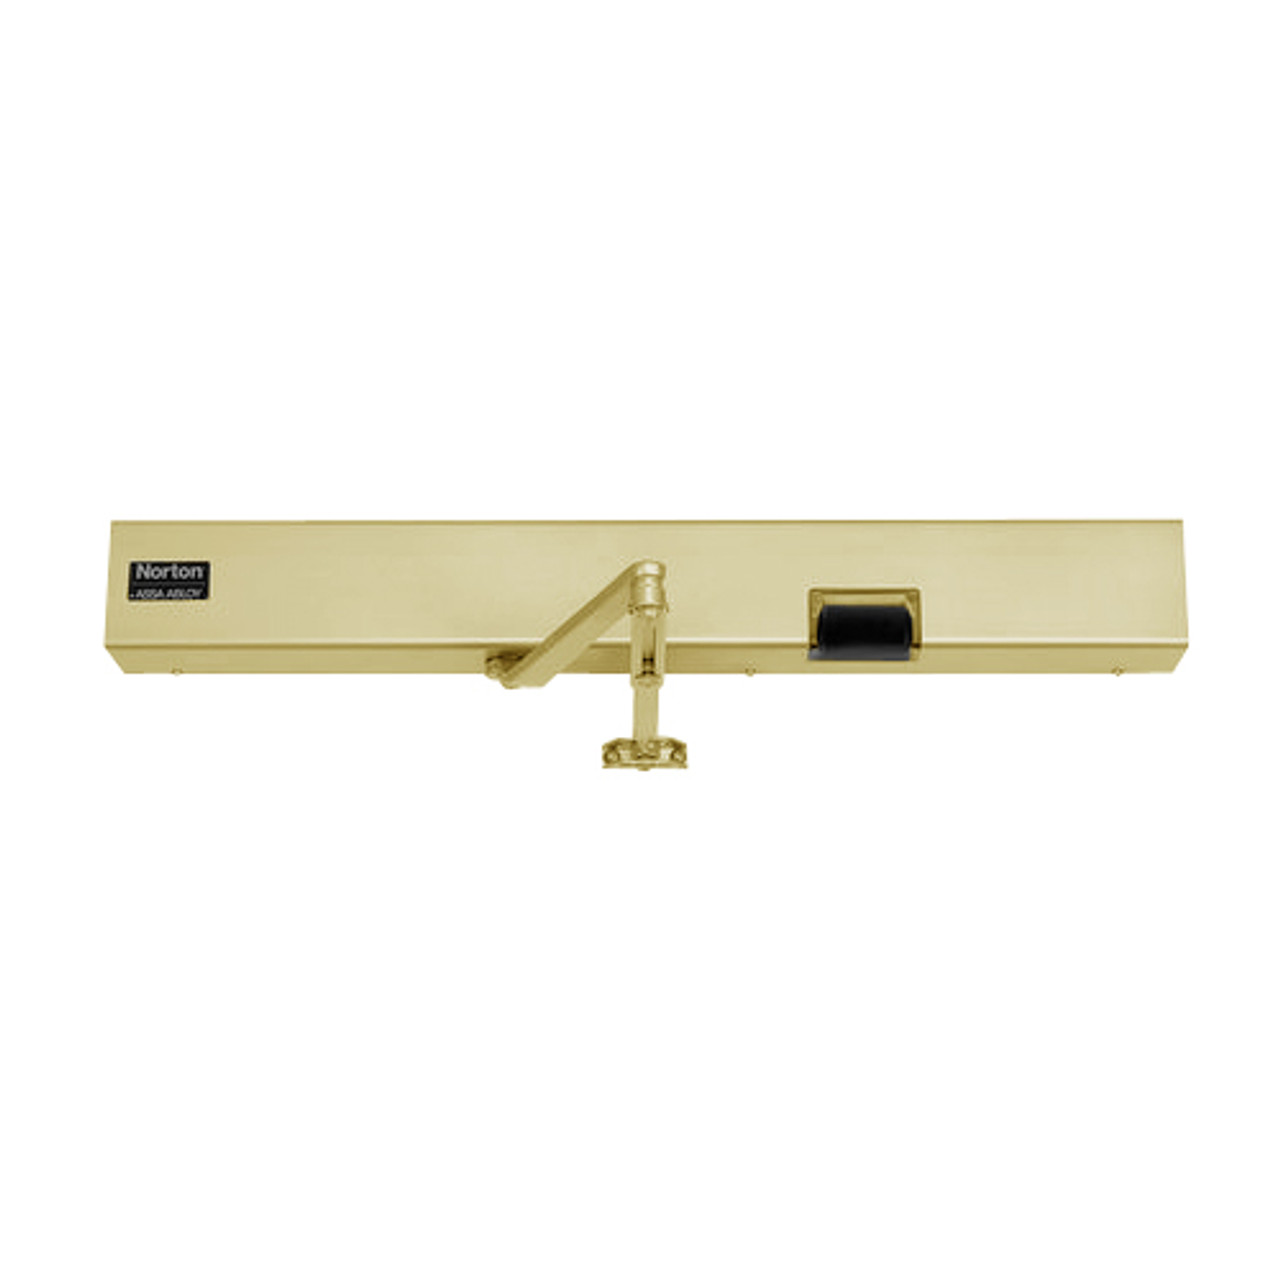 7125SZ-RH-120VAC-696 Norton 7100SZ Series Safe Zone Multi-Point Closer/Holder with Motion Sensor and Push Side Double Lever 11 inch Main Arm in Gold Finish